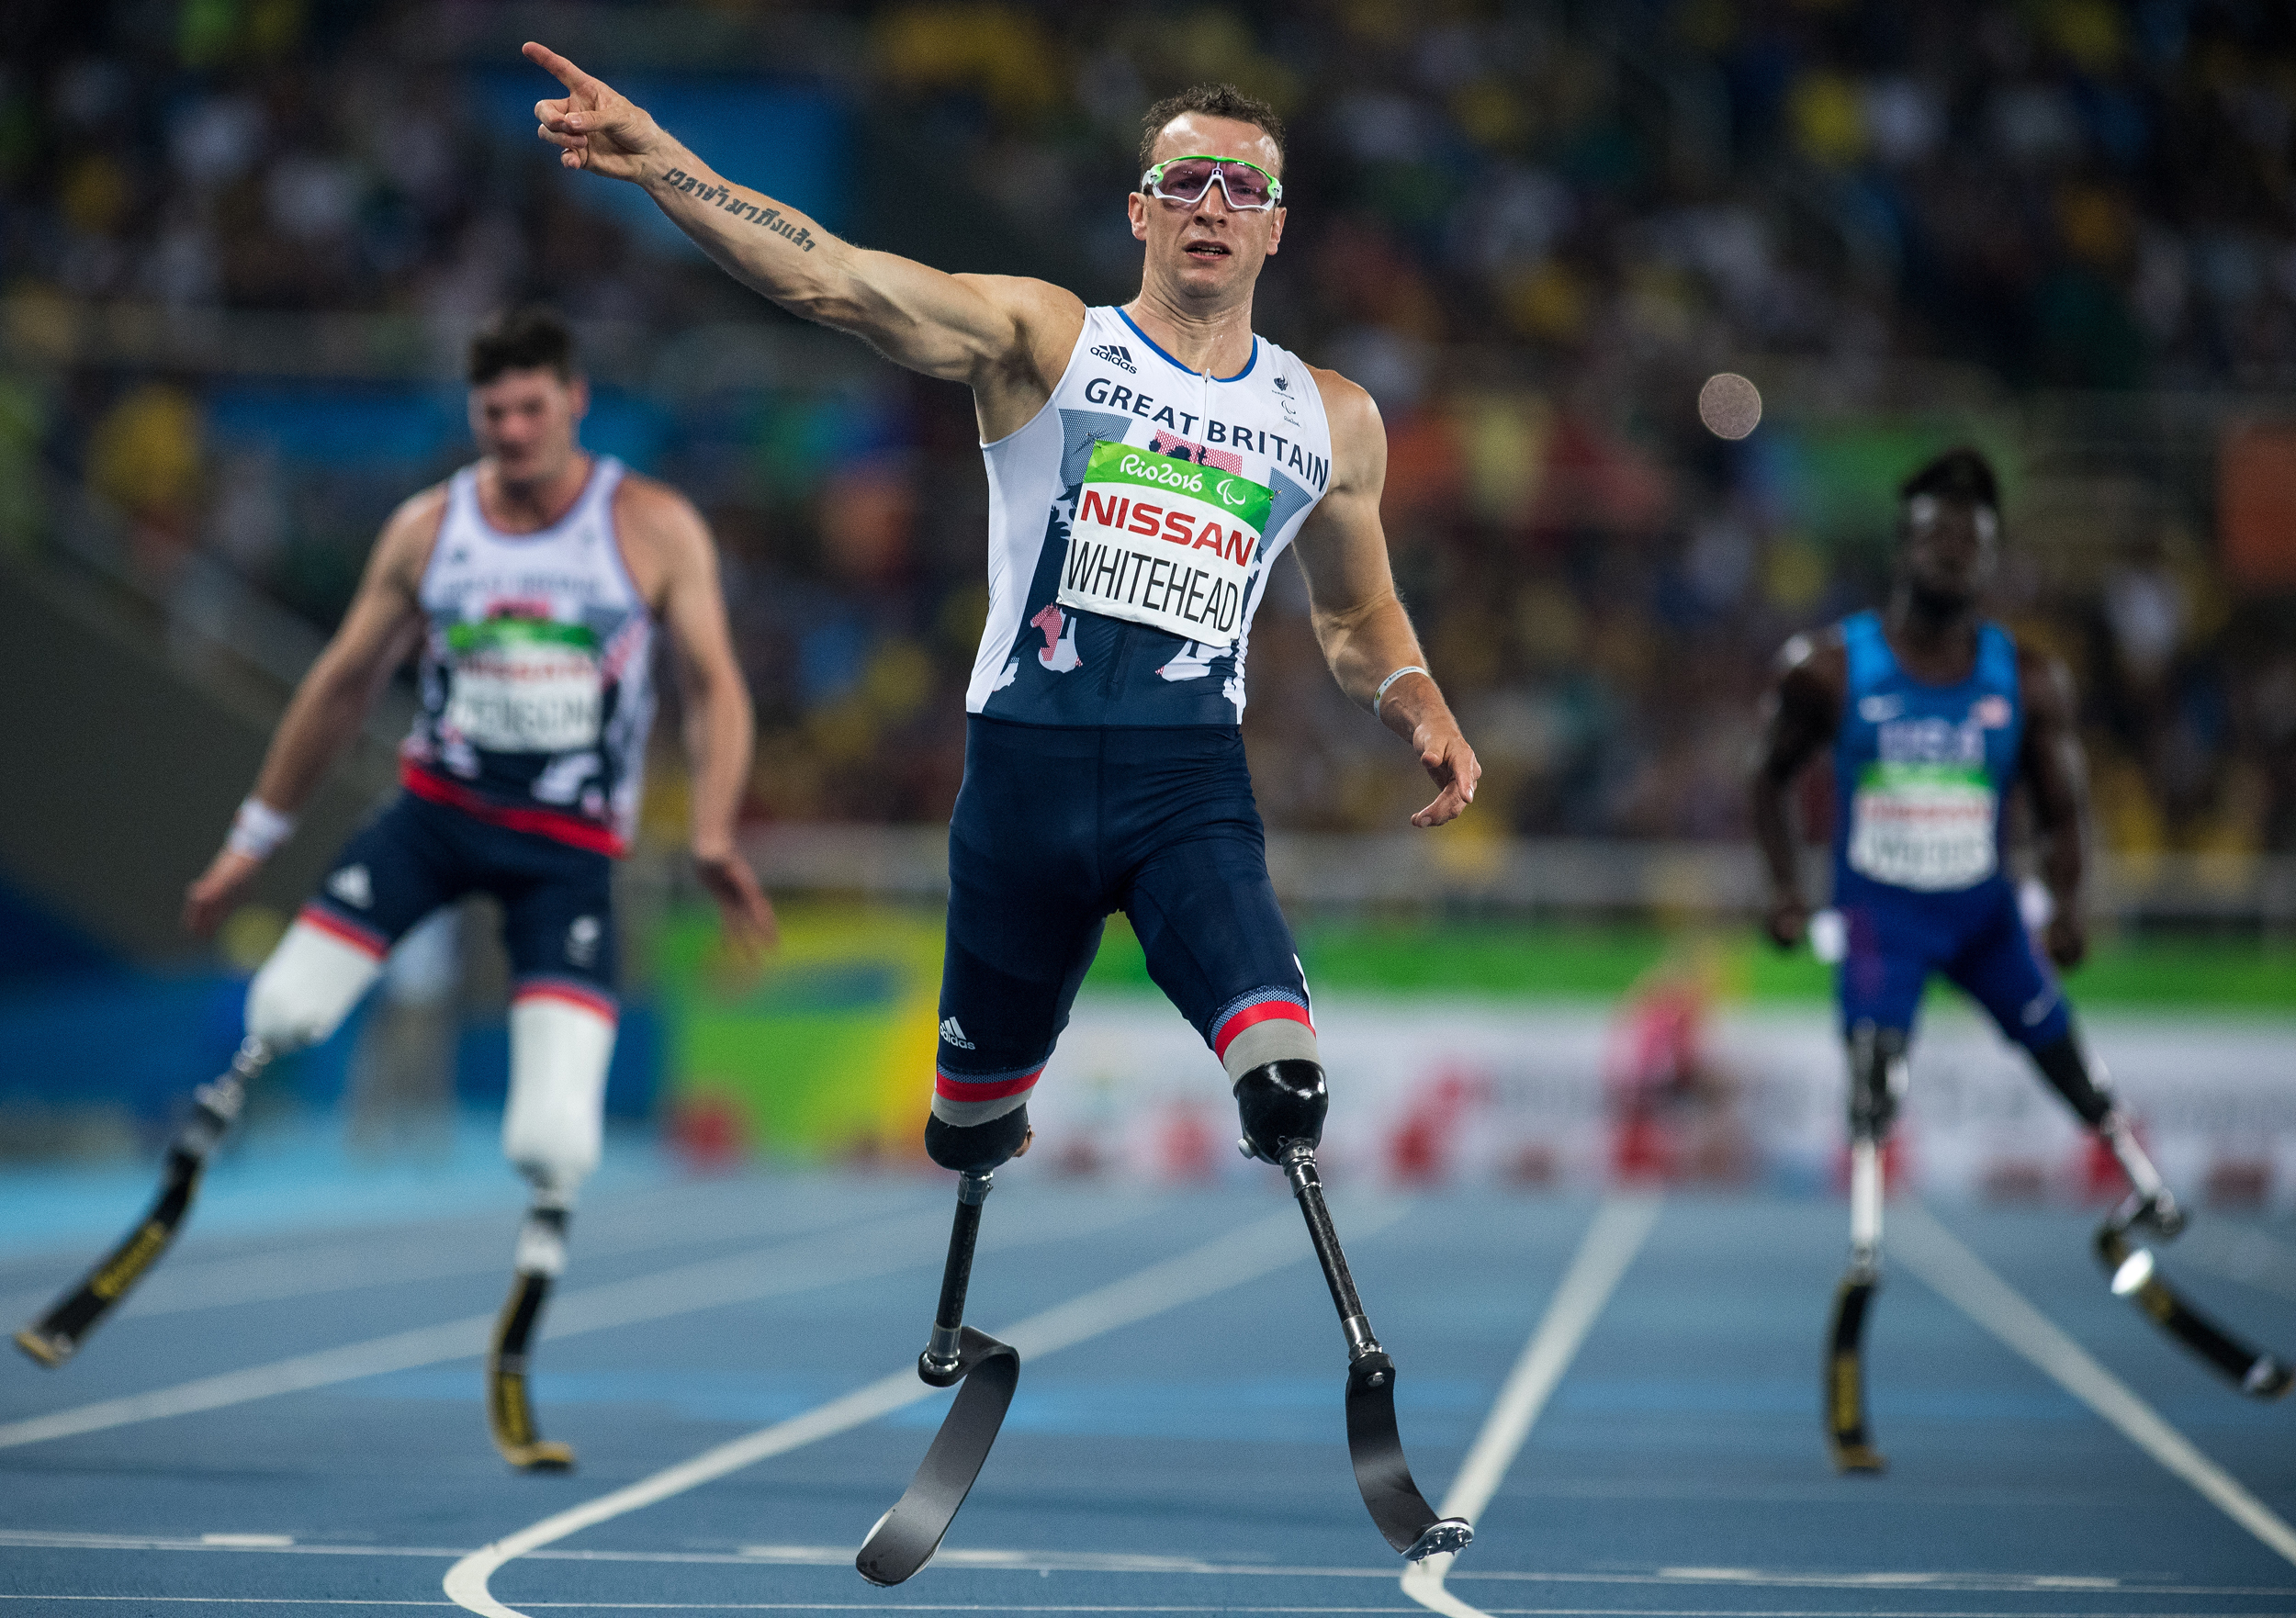 Paralympics 2016 – “What an amazing experience”: Behind the Camera ...